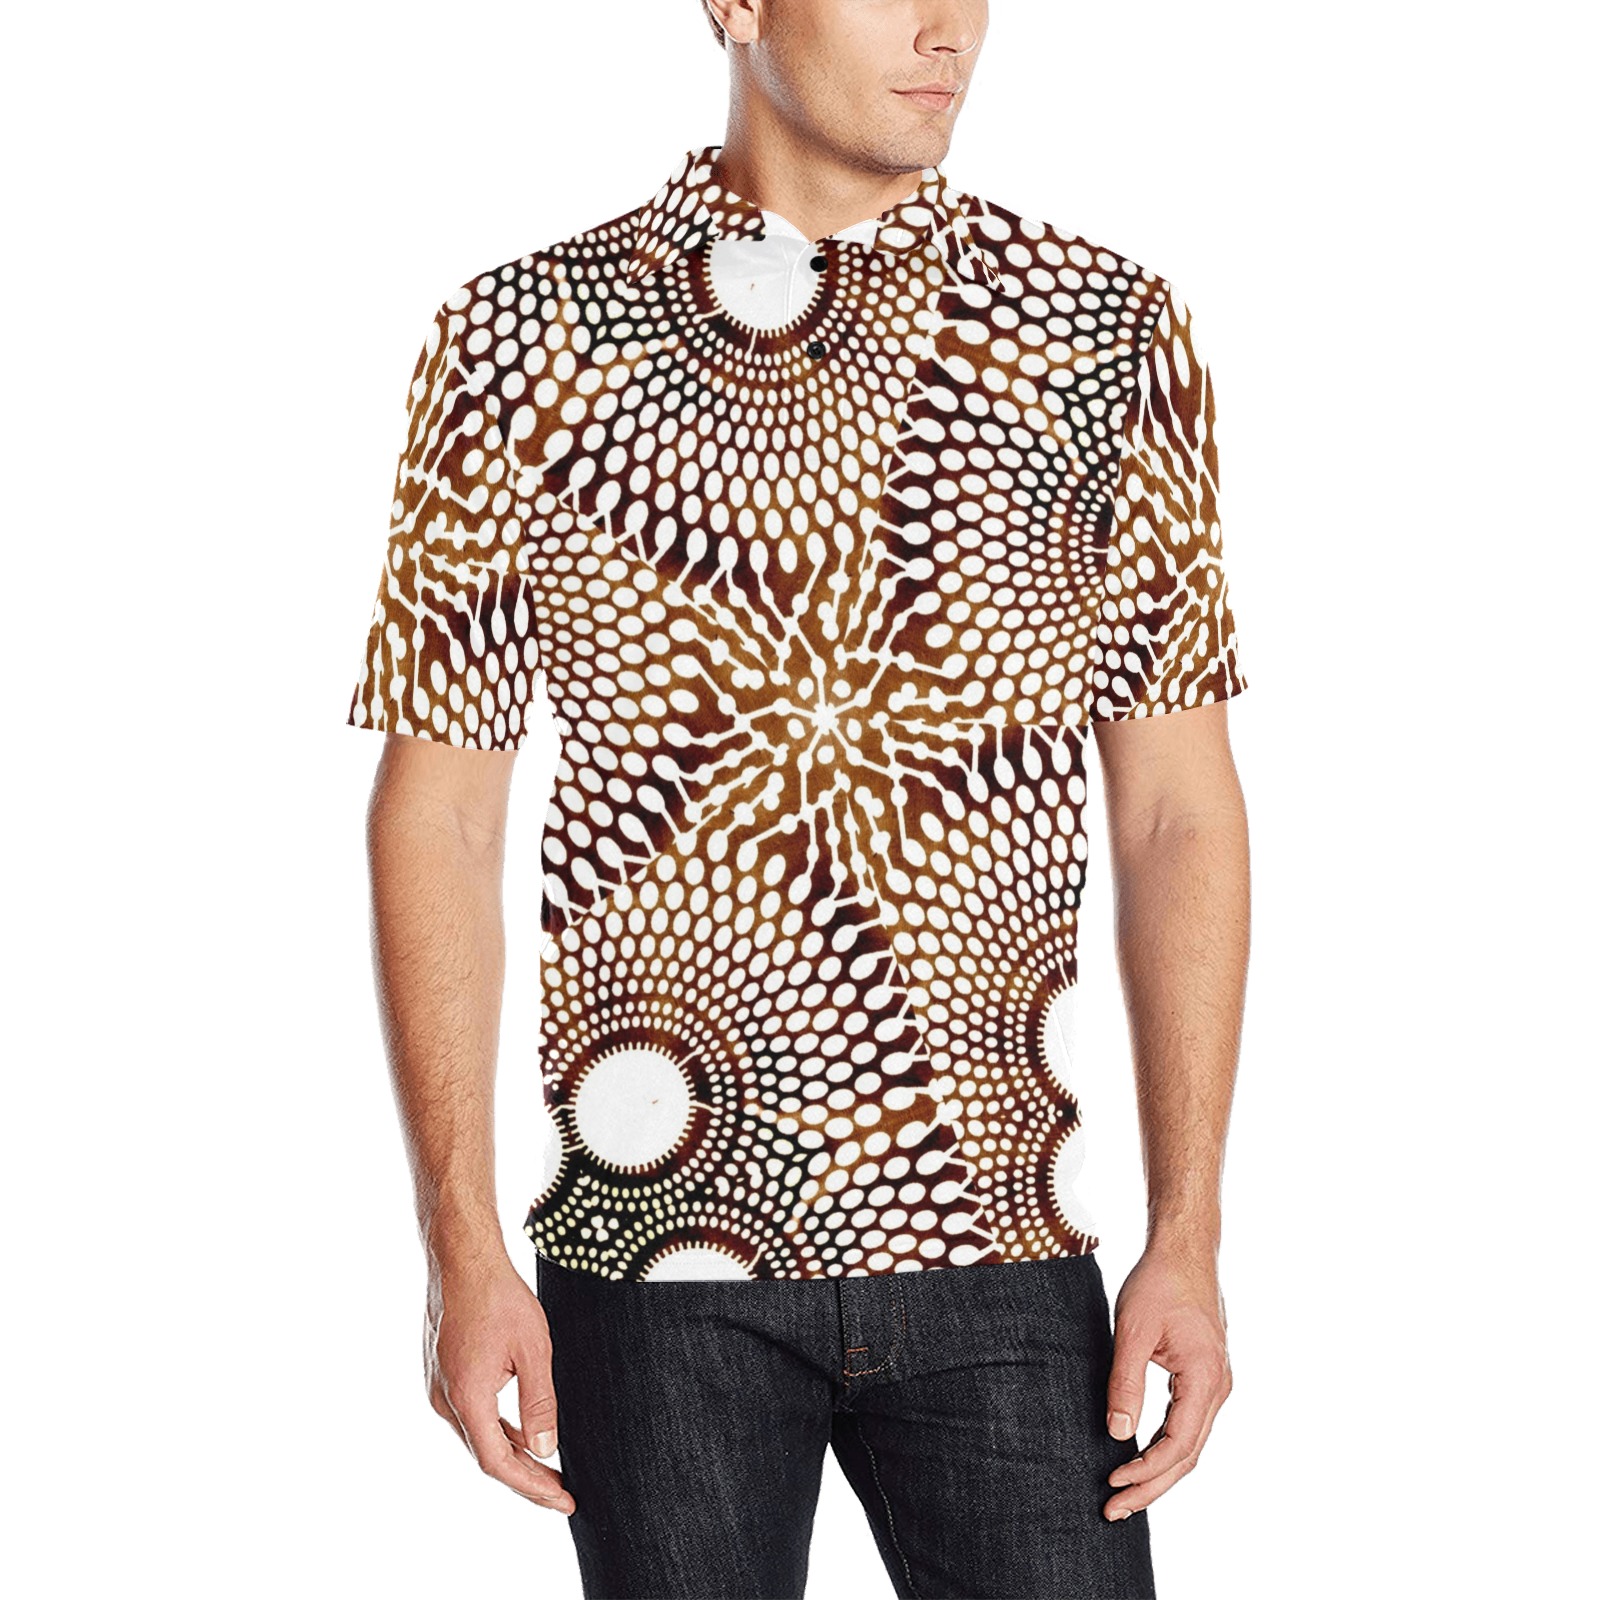 AFRICAN PRINT PATTERN 4 Men's All Over Print Polo Shirt (Model T55)